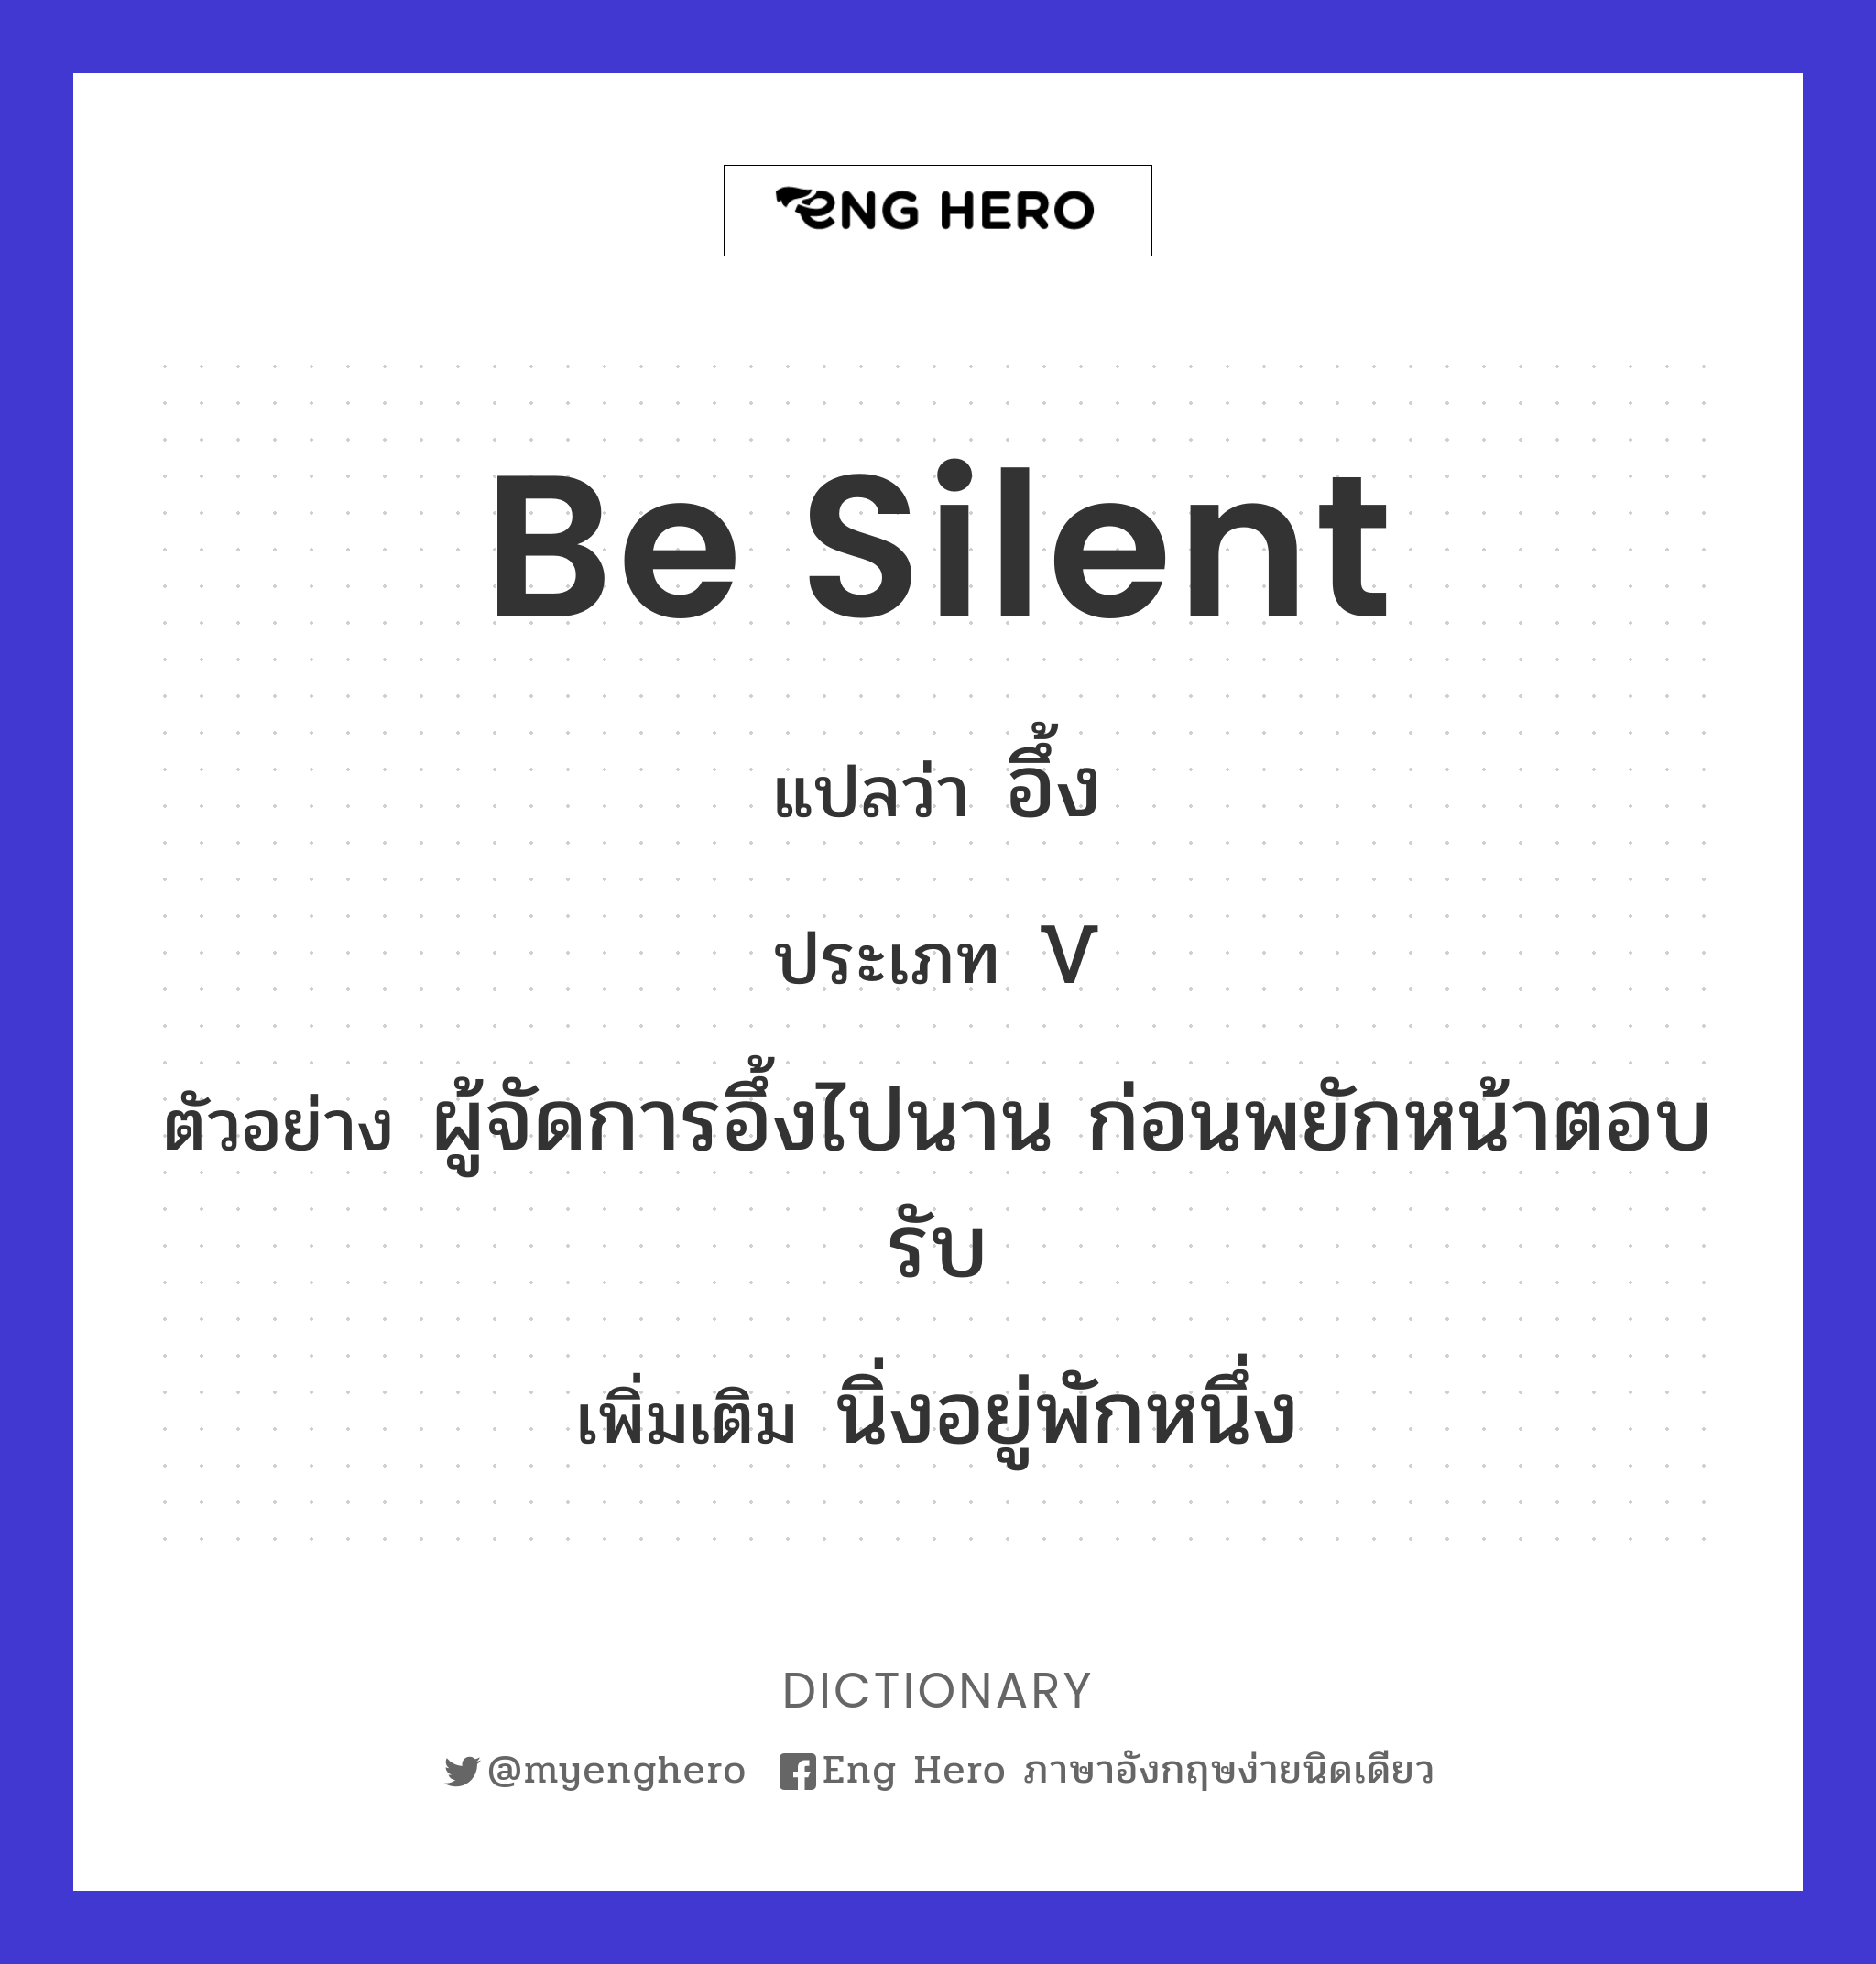 be silent